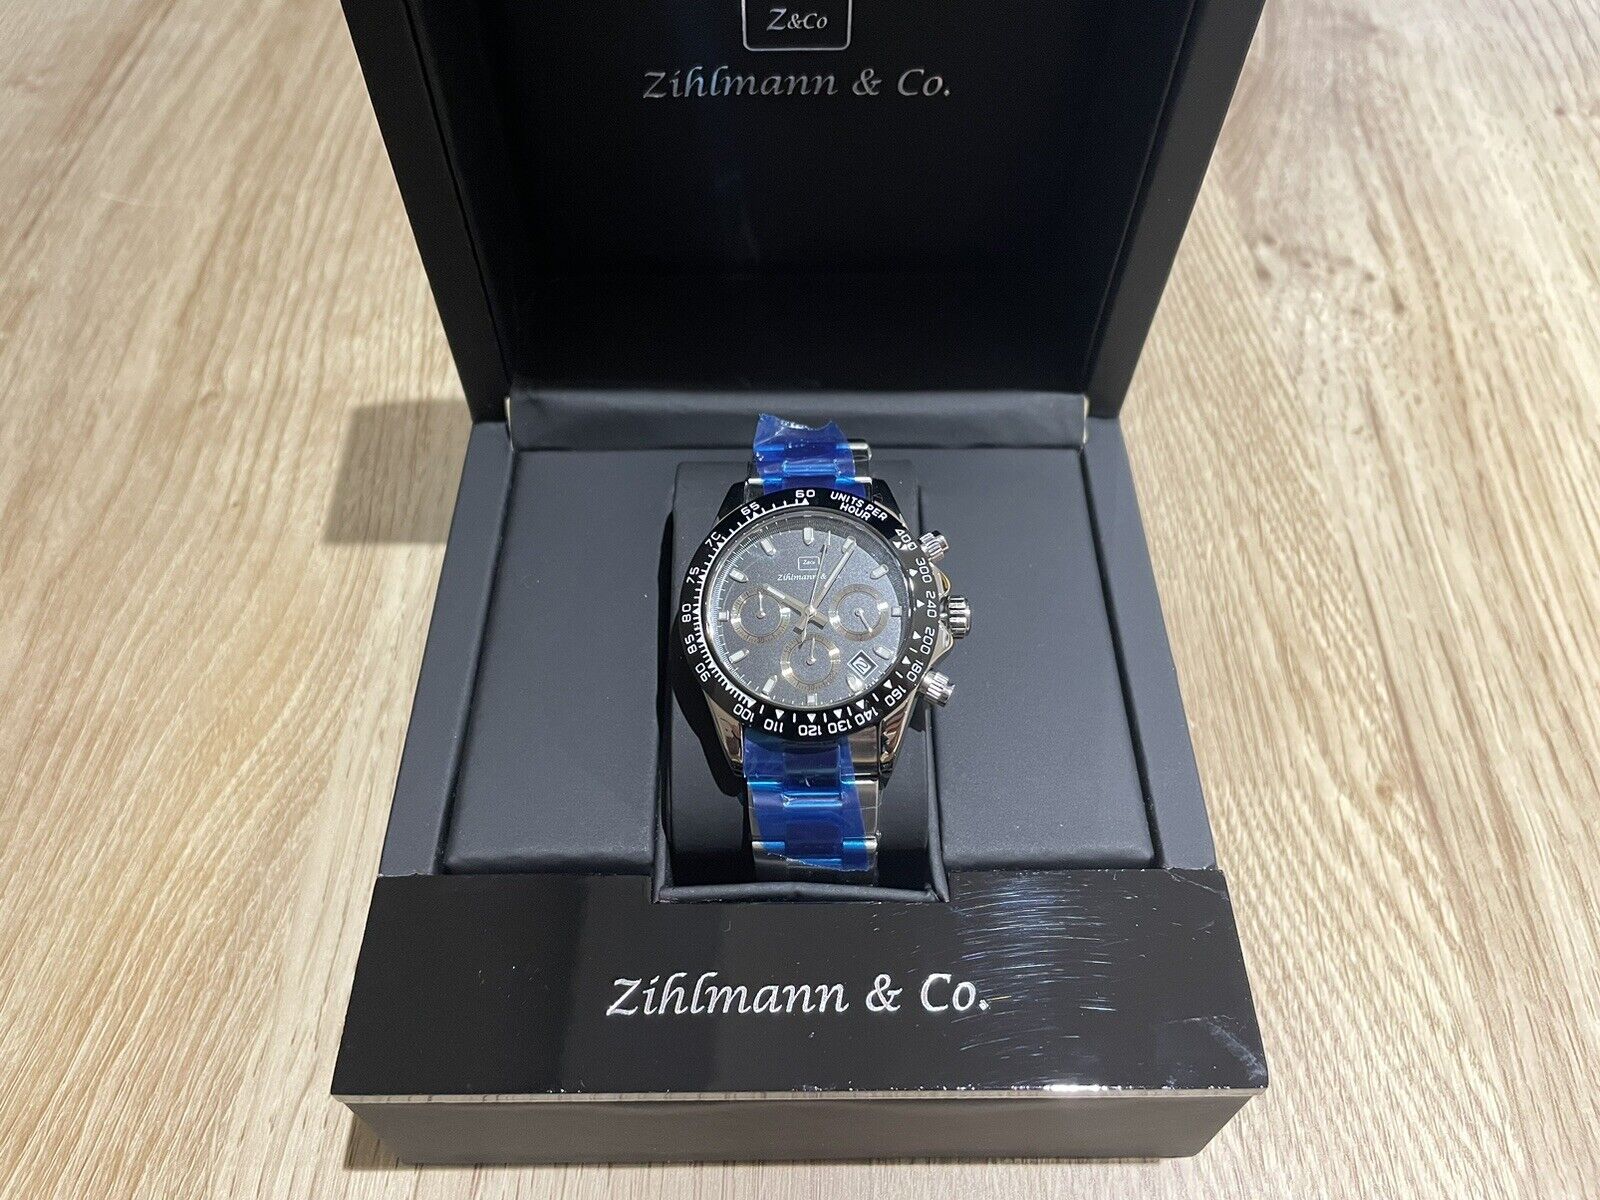 MENS ZIHLMANN & Co Z400 WATCH – CHRONOGRAPH MOVEMENT – STAINLESS STEEL STRAP - Westies Watches